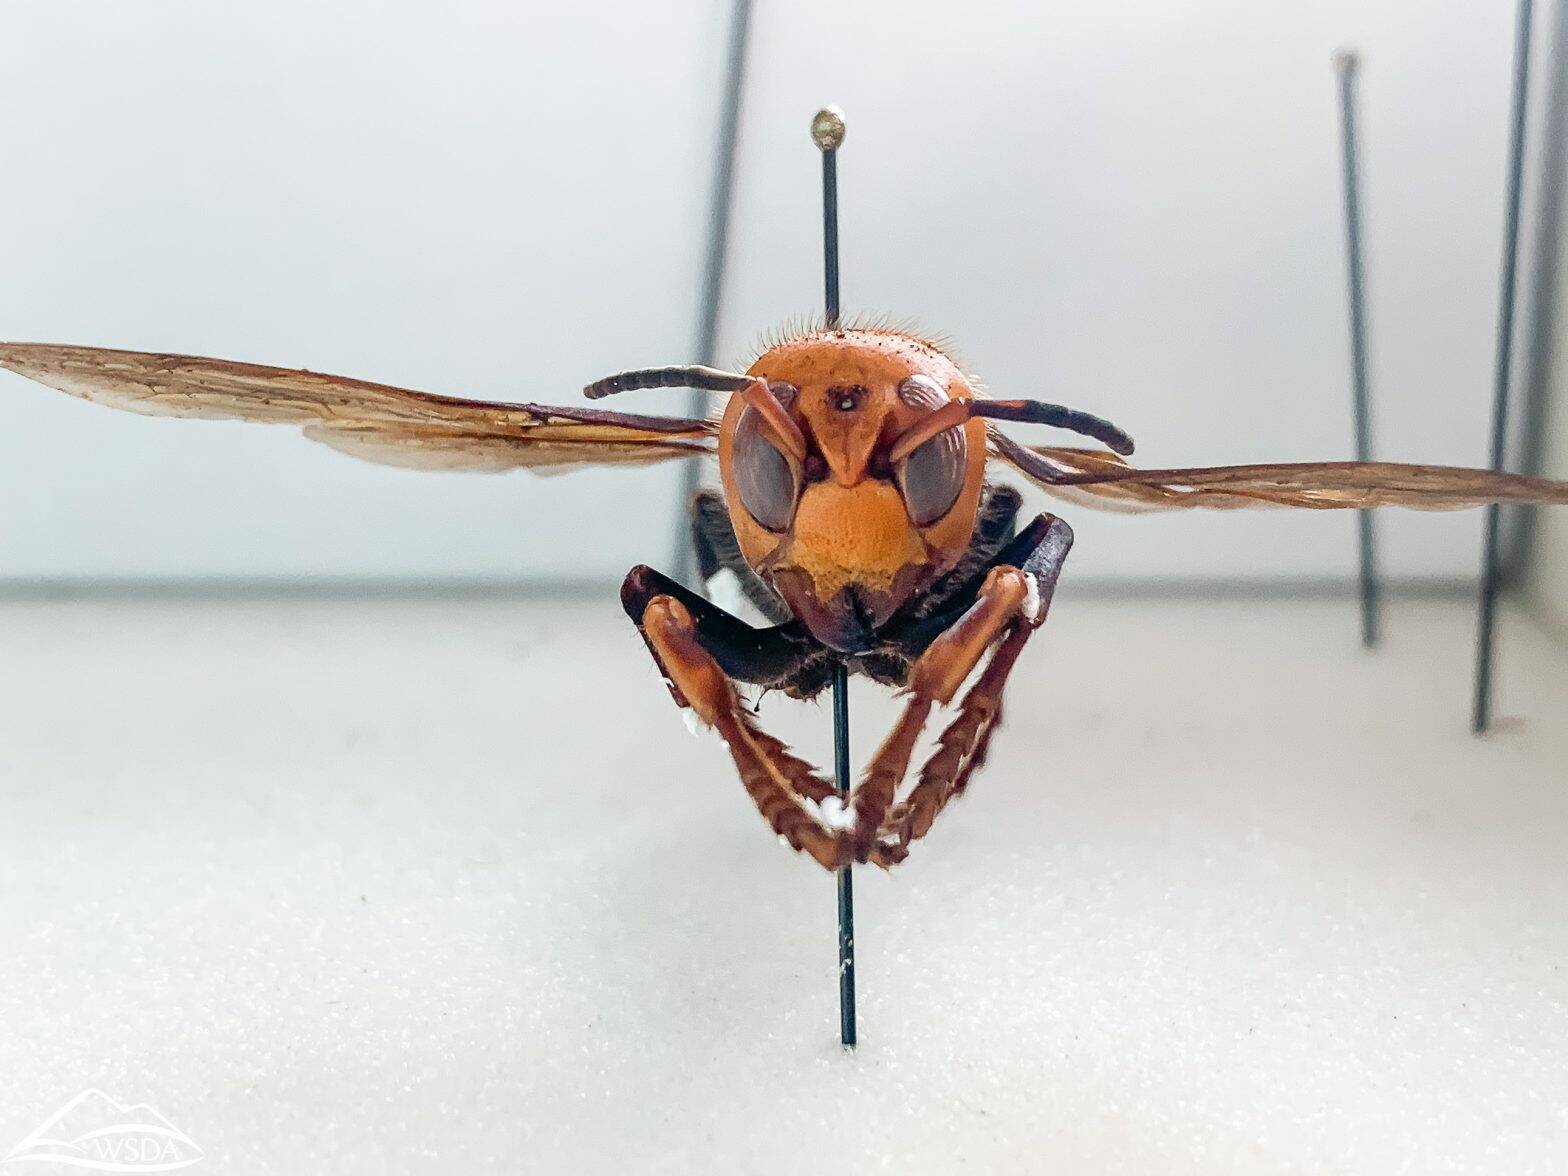 Courtesy of Washington State Department of Agriculture.
The Northern giant hornet is an invasive species from Asia and a known predator of honeybees.